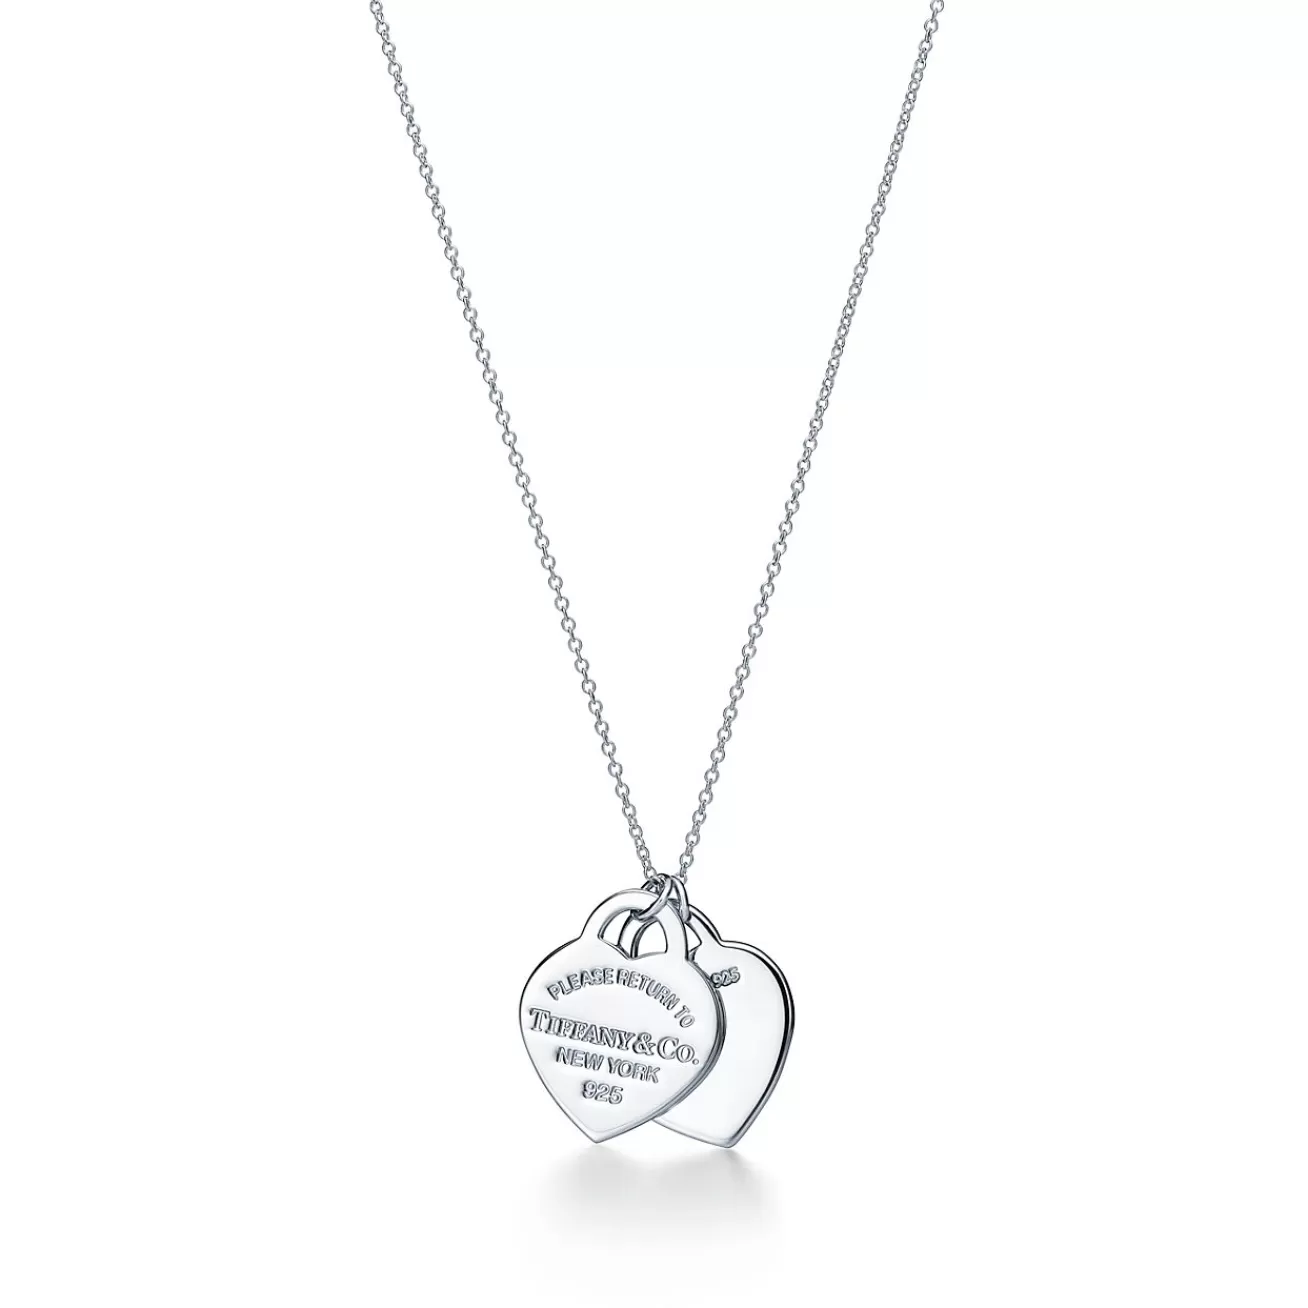 Tiffany & Co. Return to Tiffany® Tiffany Blue® Double Heart Tag Pendant in Silver, Small | ^ Necklaces & Pendants | Sterling Silver Jewelry